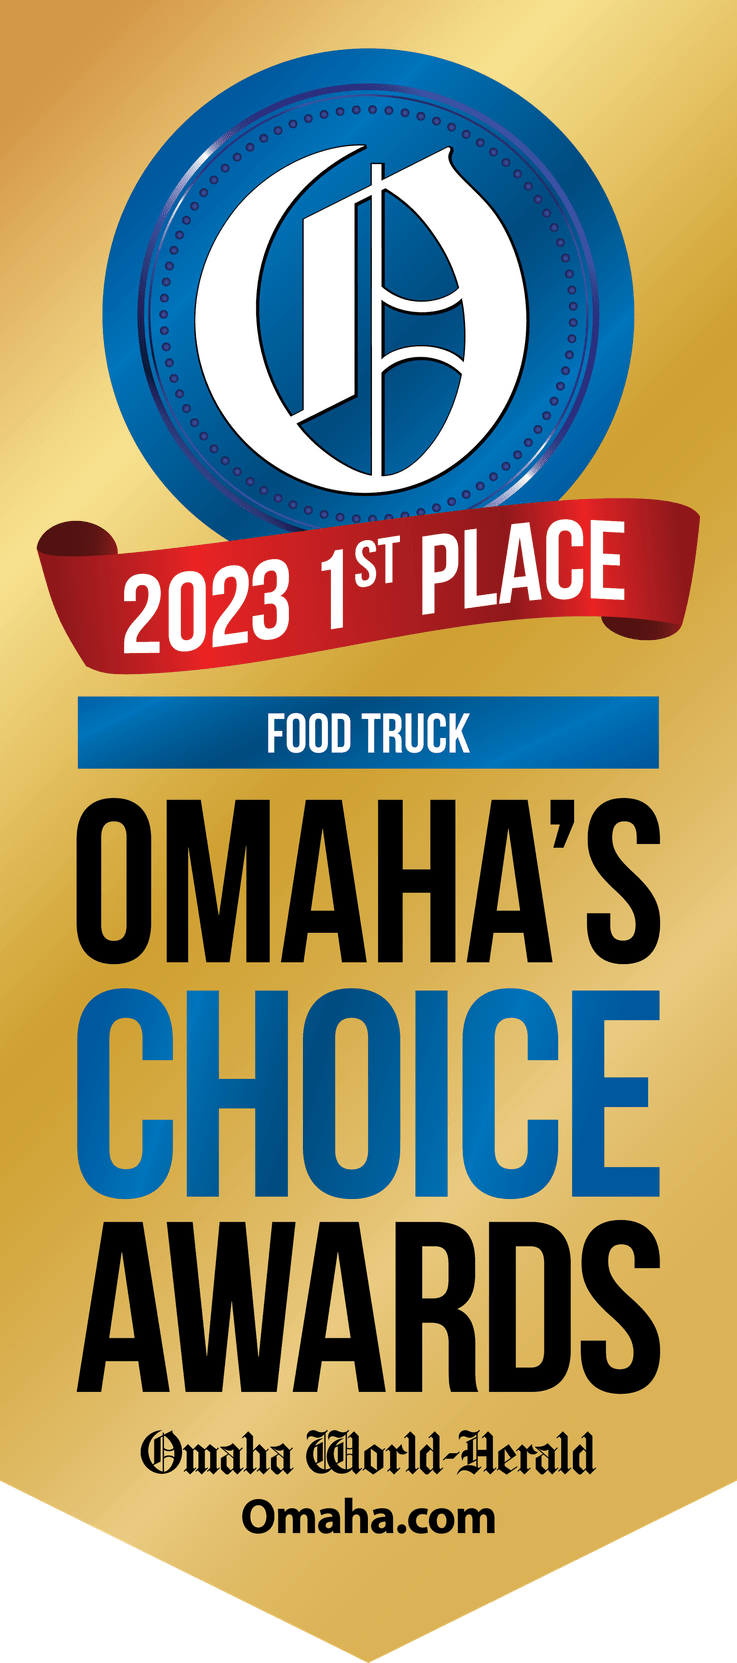 2023. 1st place Food Truck Award